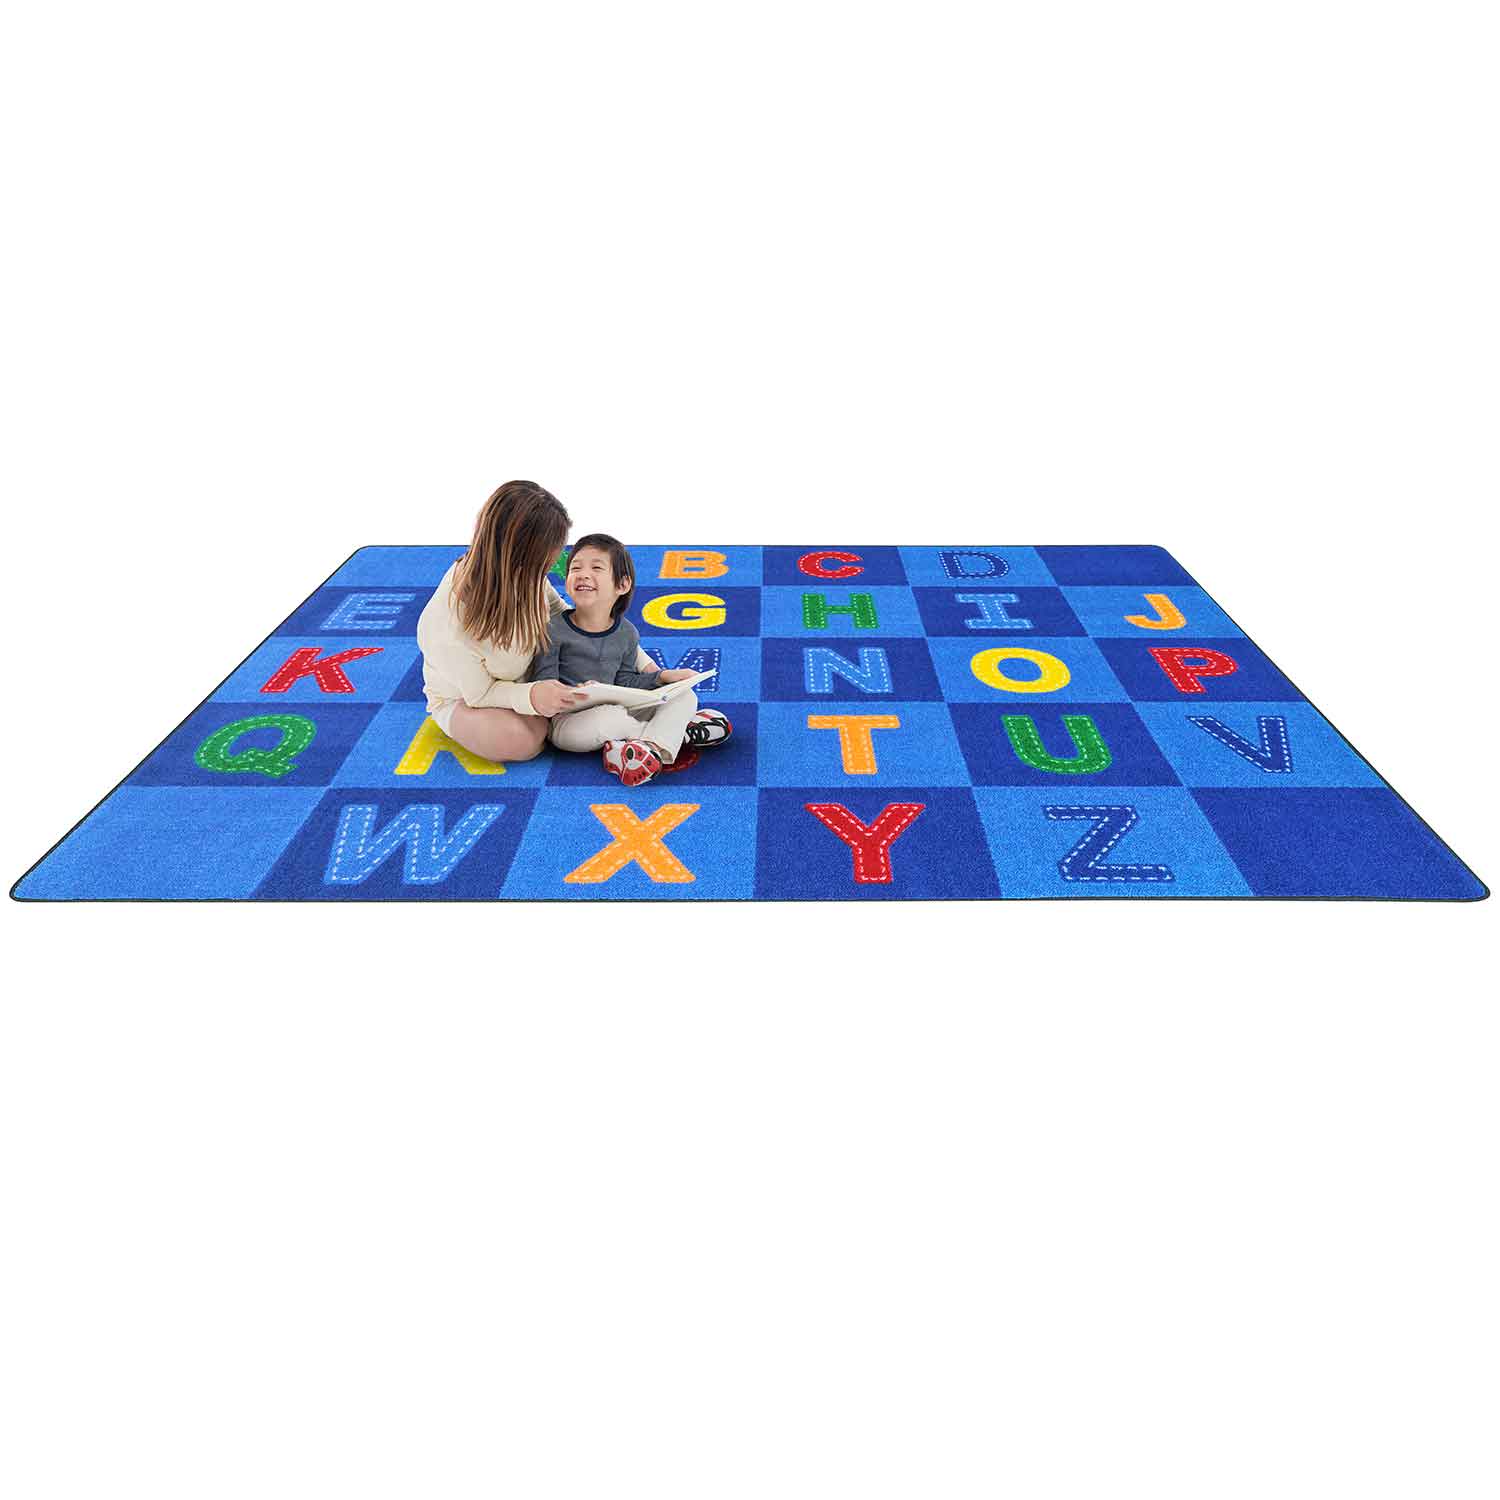 Patchwork Letters Rug